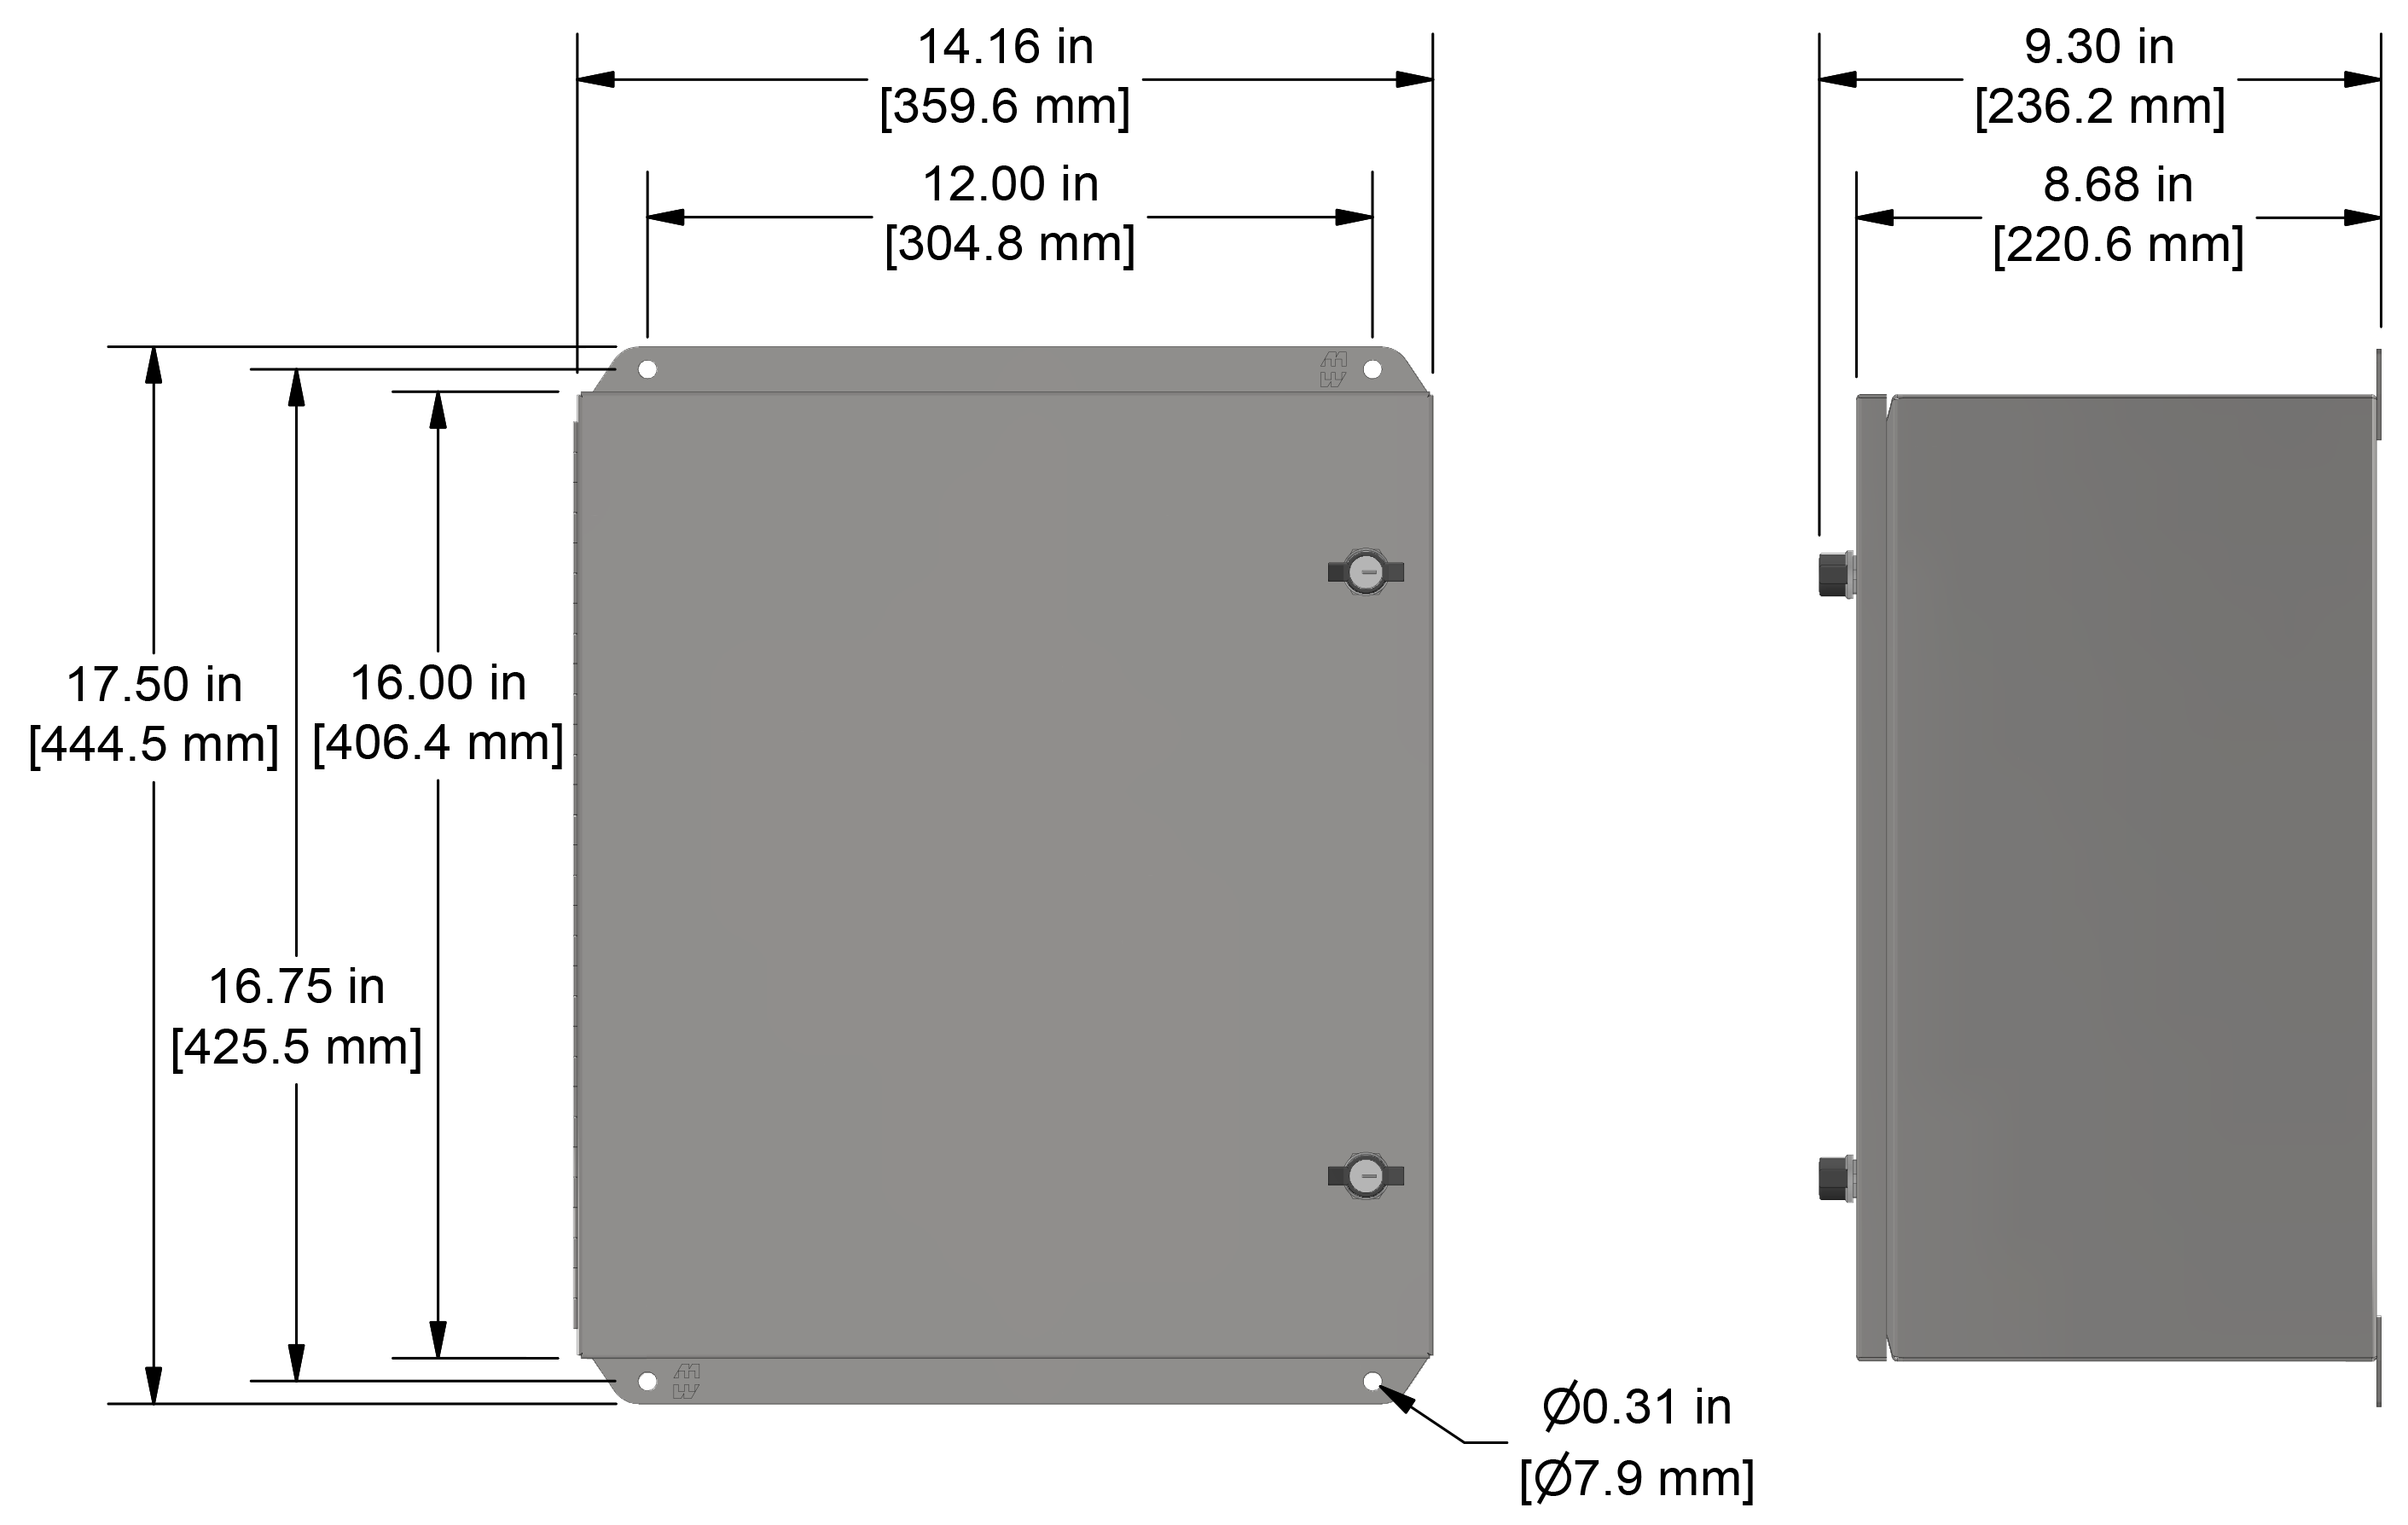 A drawing showing the dimensions of a CTC SSB4000 industrial enclosure.